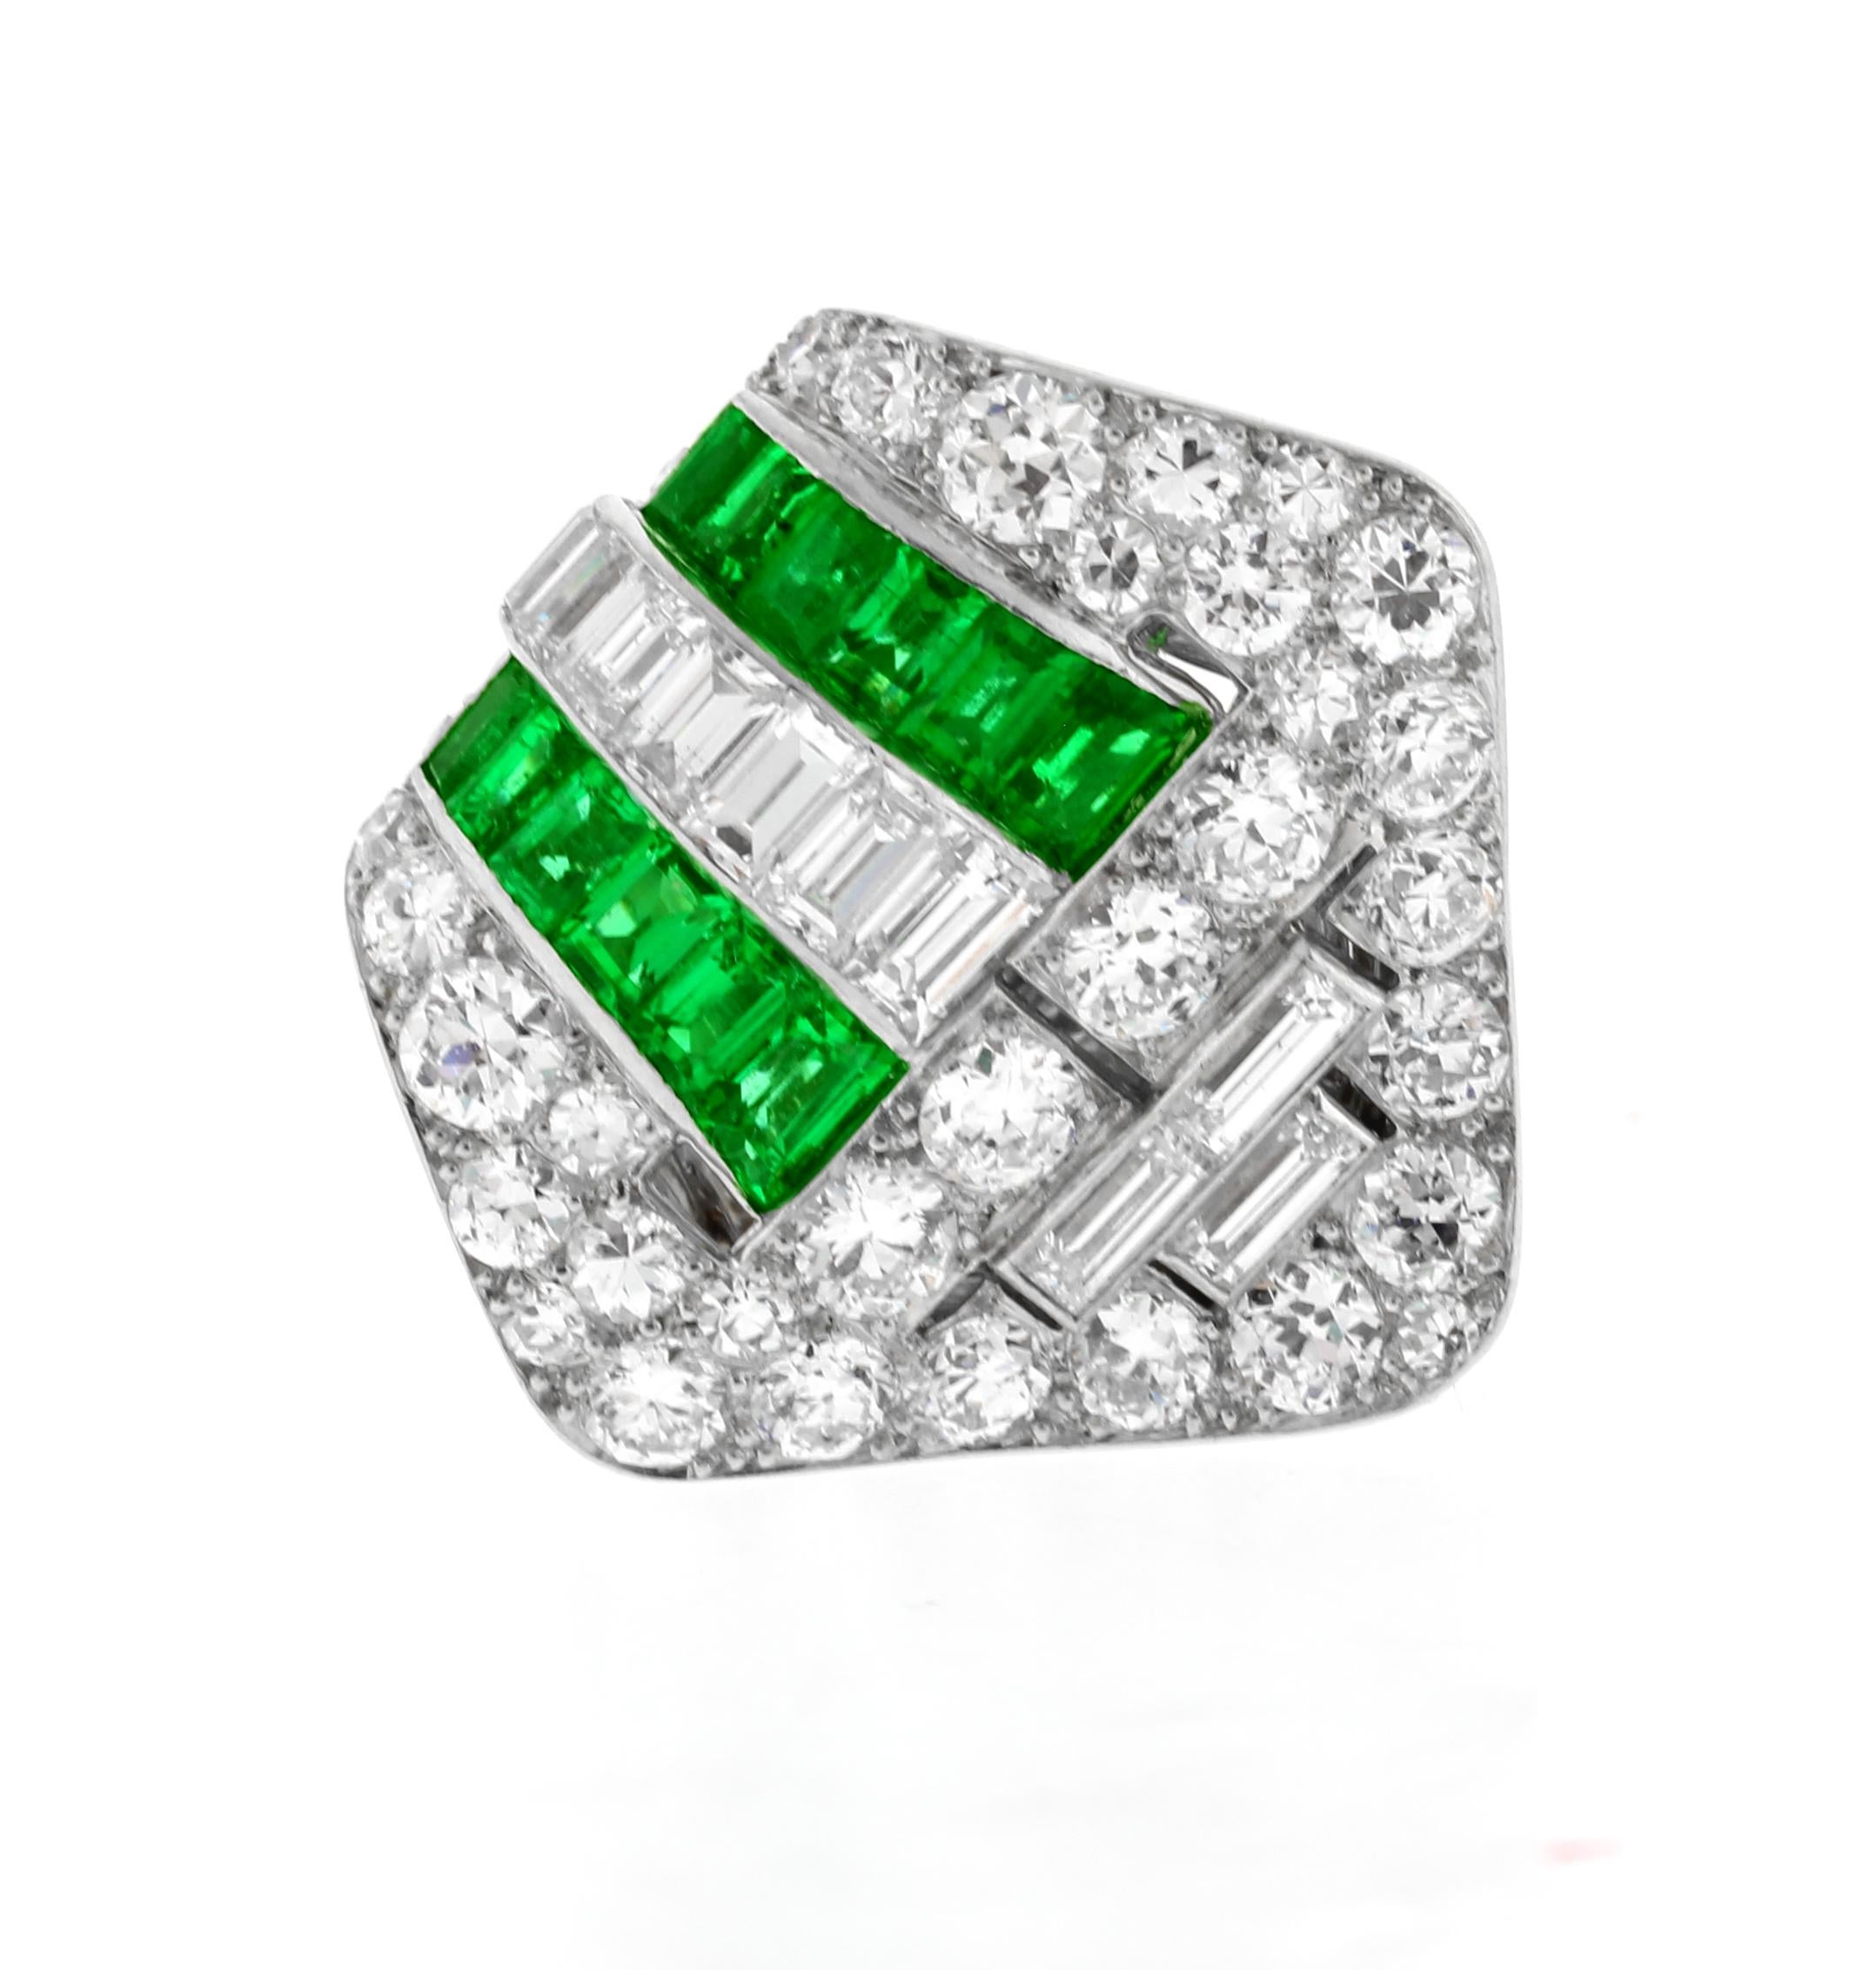 From Parisian jeweler Boucheron this absolutely fabulous Art Deco Emerald and diamond clip brooch. The brooch feature 4½ carats of shimmering diamond and  1.25 carats of the finest gem  Columbian emeralds. Maybe clipped over a lapel, collar, cuff or